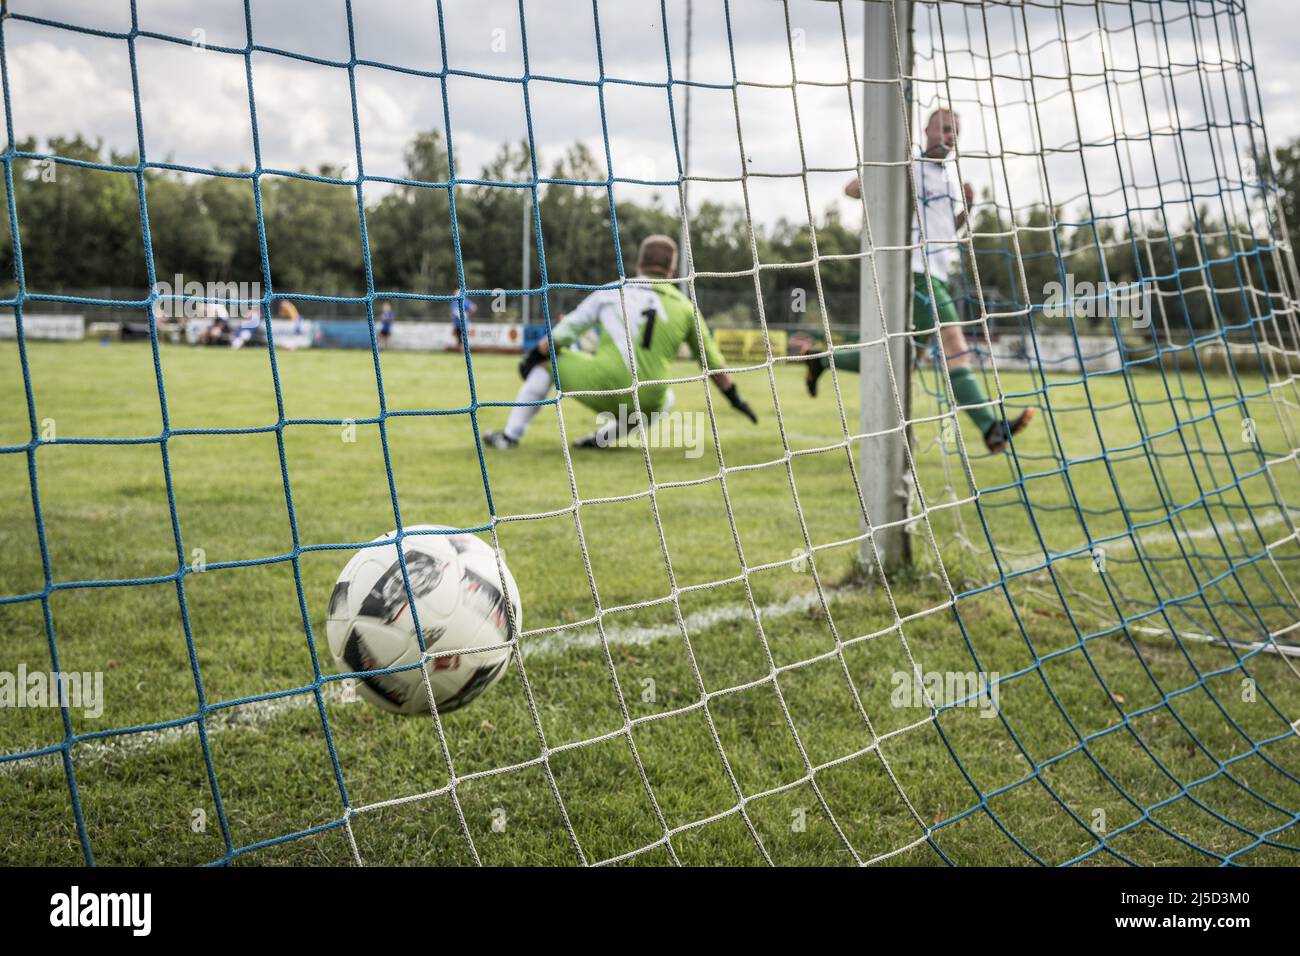 TSV Böbrach concedes a goal in the match against DJK Rattenberg. In the end, the score is 0:19, amateur soccer, worst soccer club in Bavaria [automated translation] Stock Photo